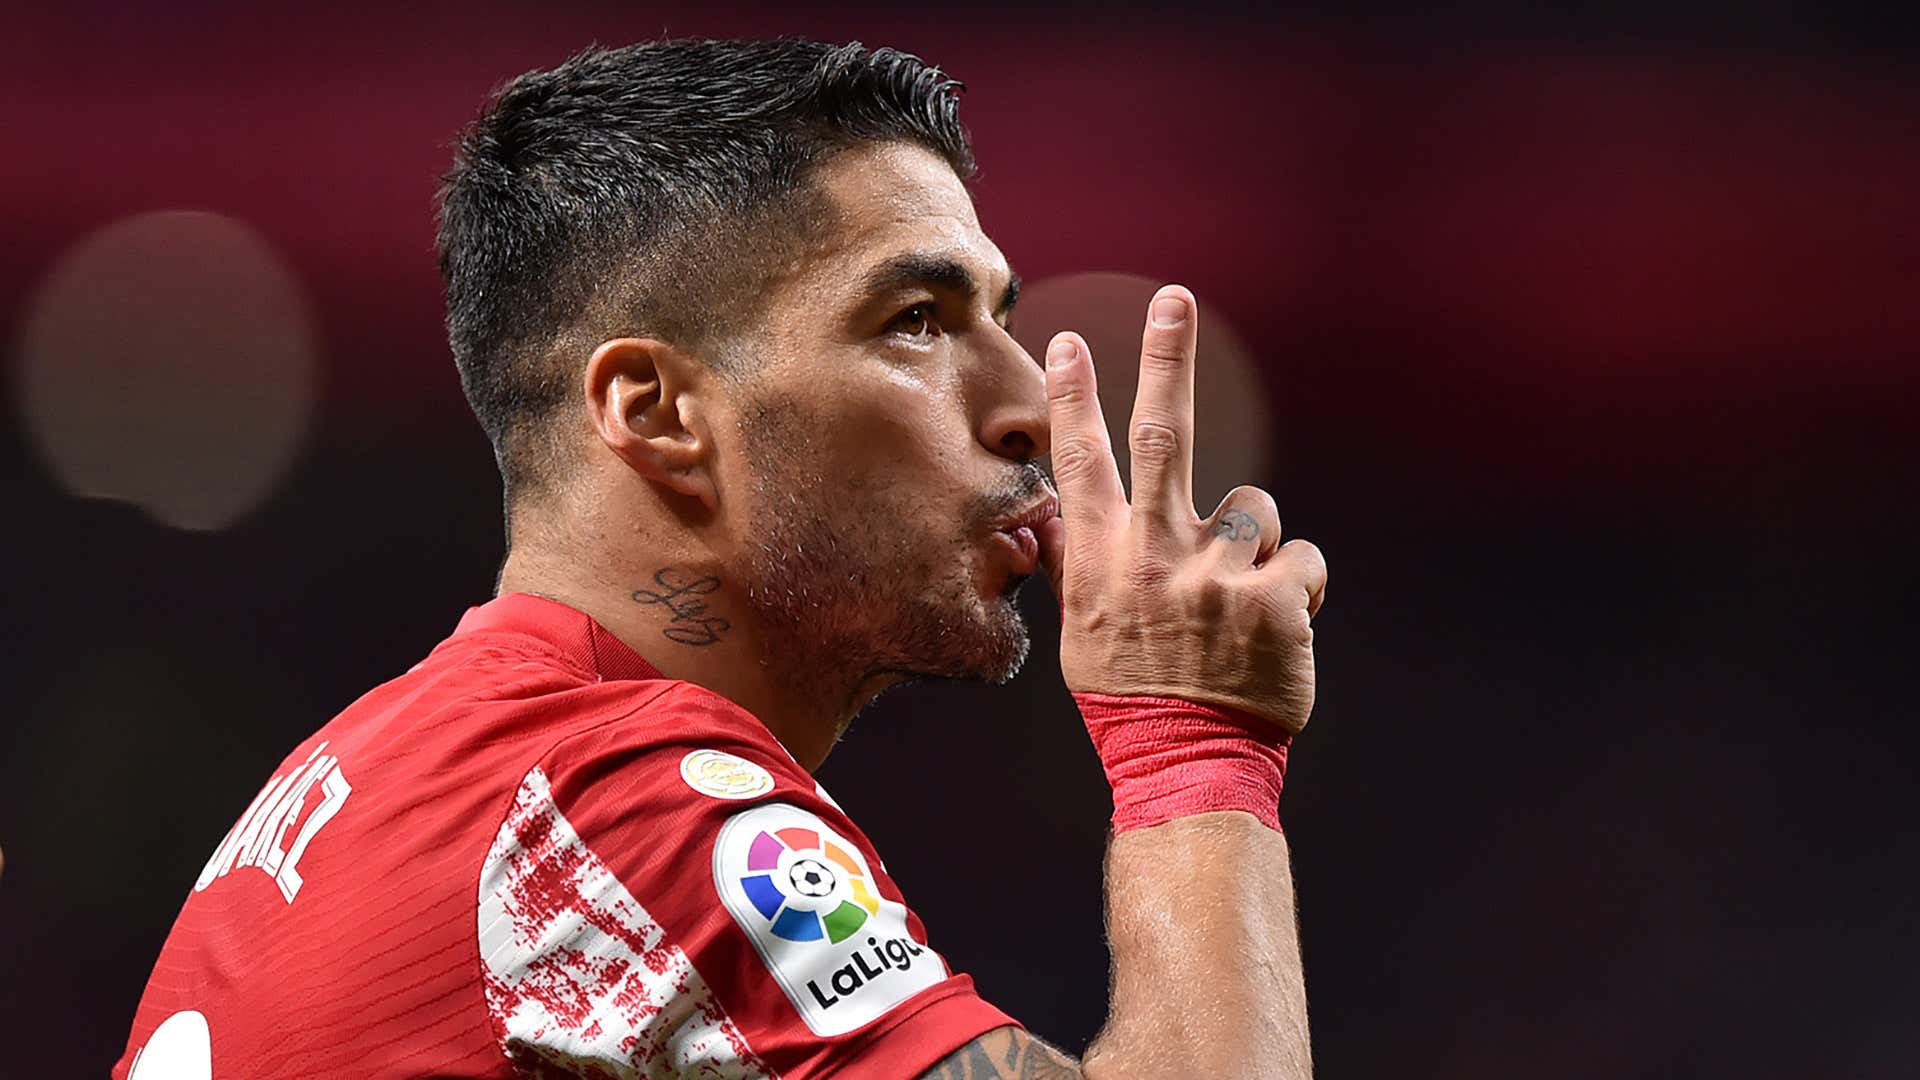 Luis Suarez transfer to Aston Villa: Atletico Madrid won't sell in January amid reports of summer Gerrard reunion for ex-Liverpool striker | Goal.com